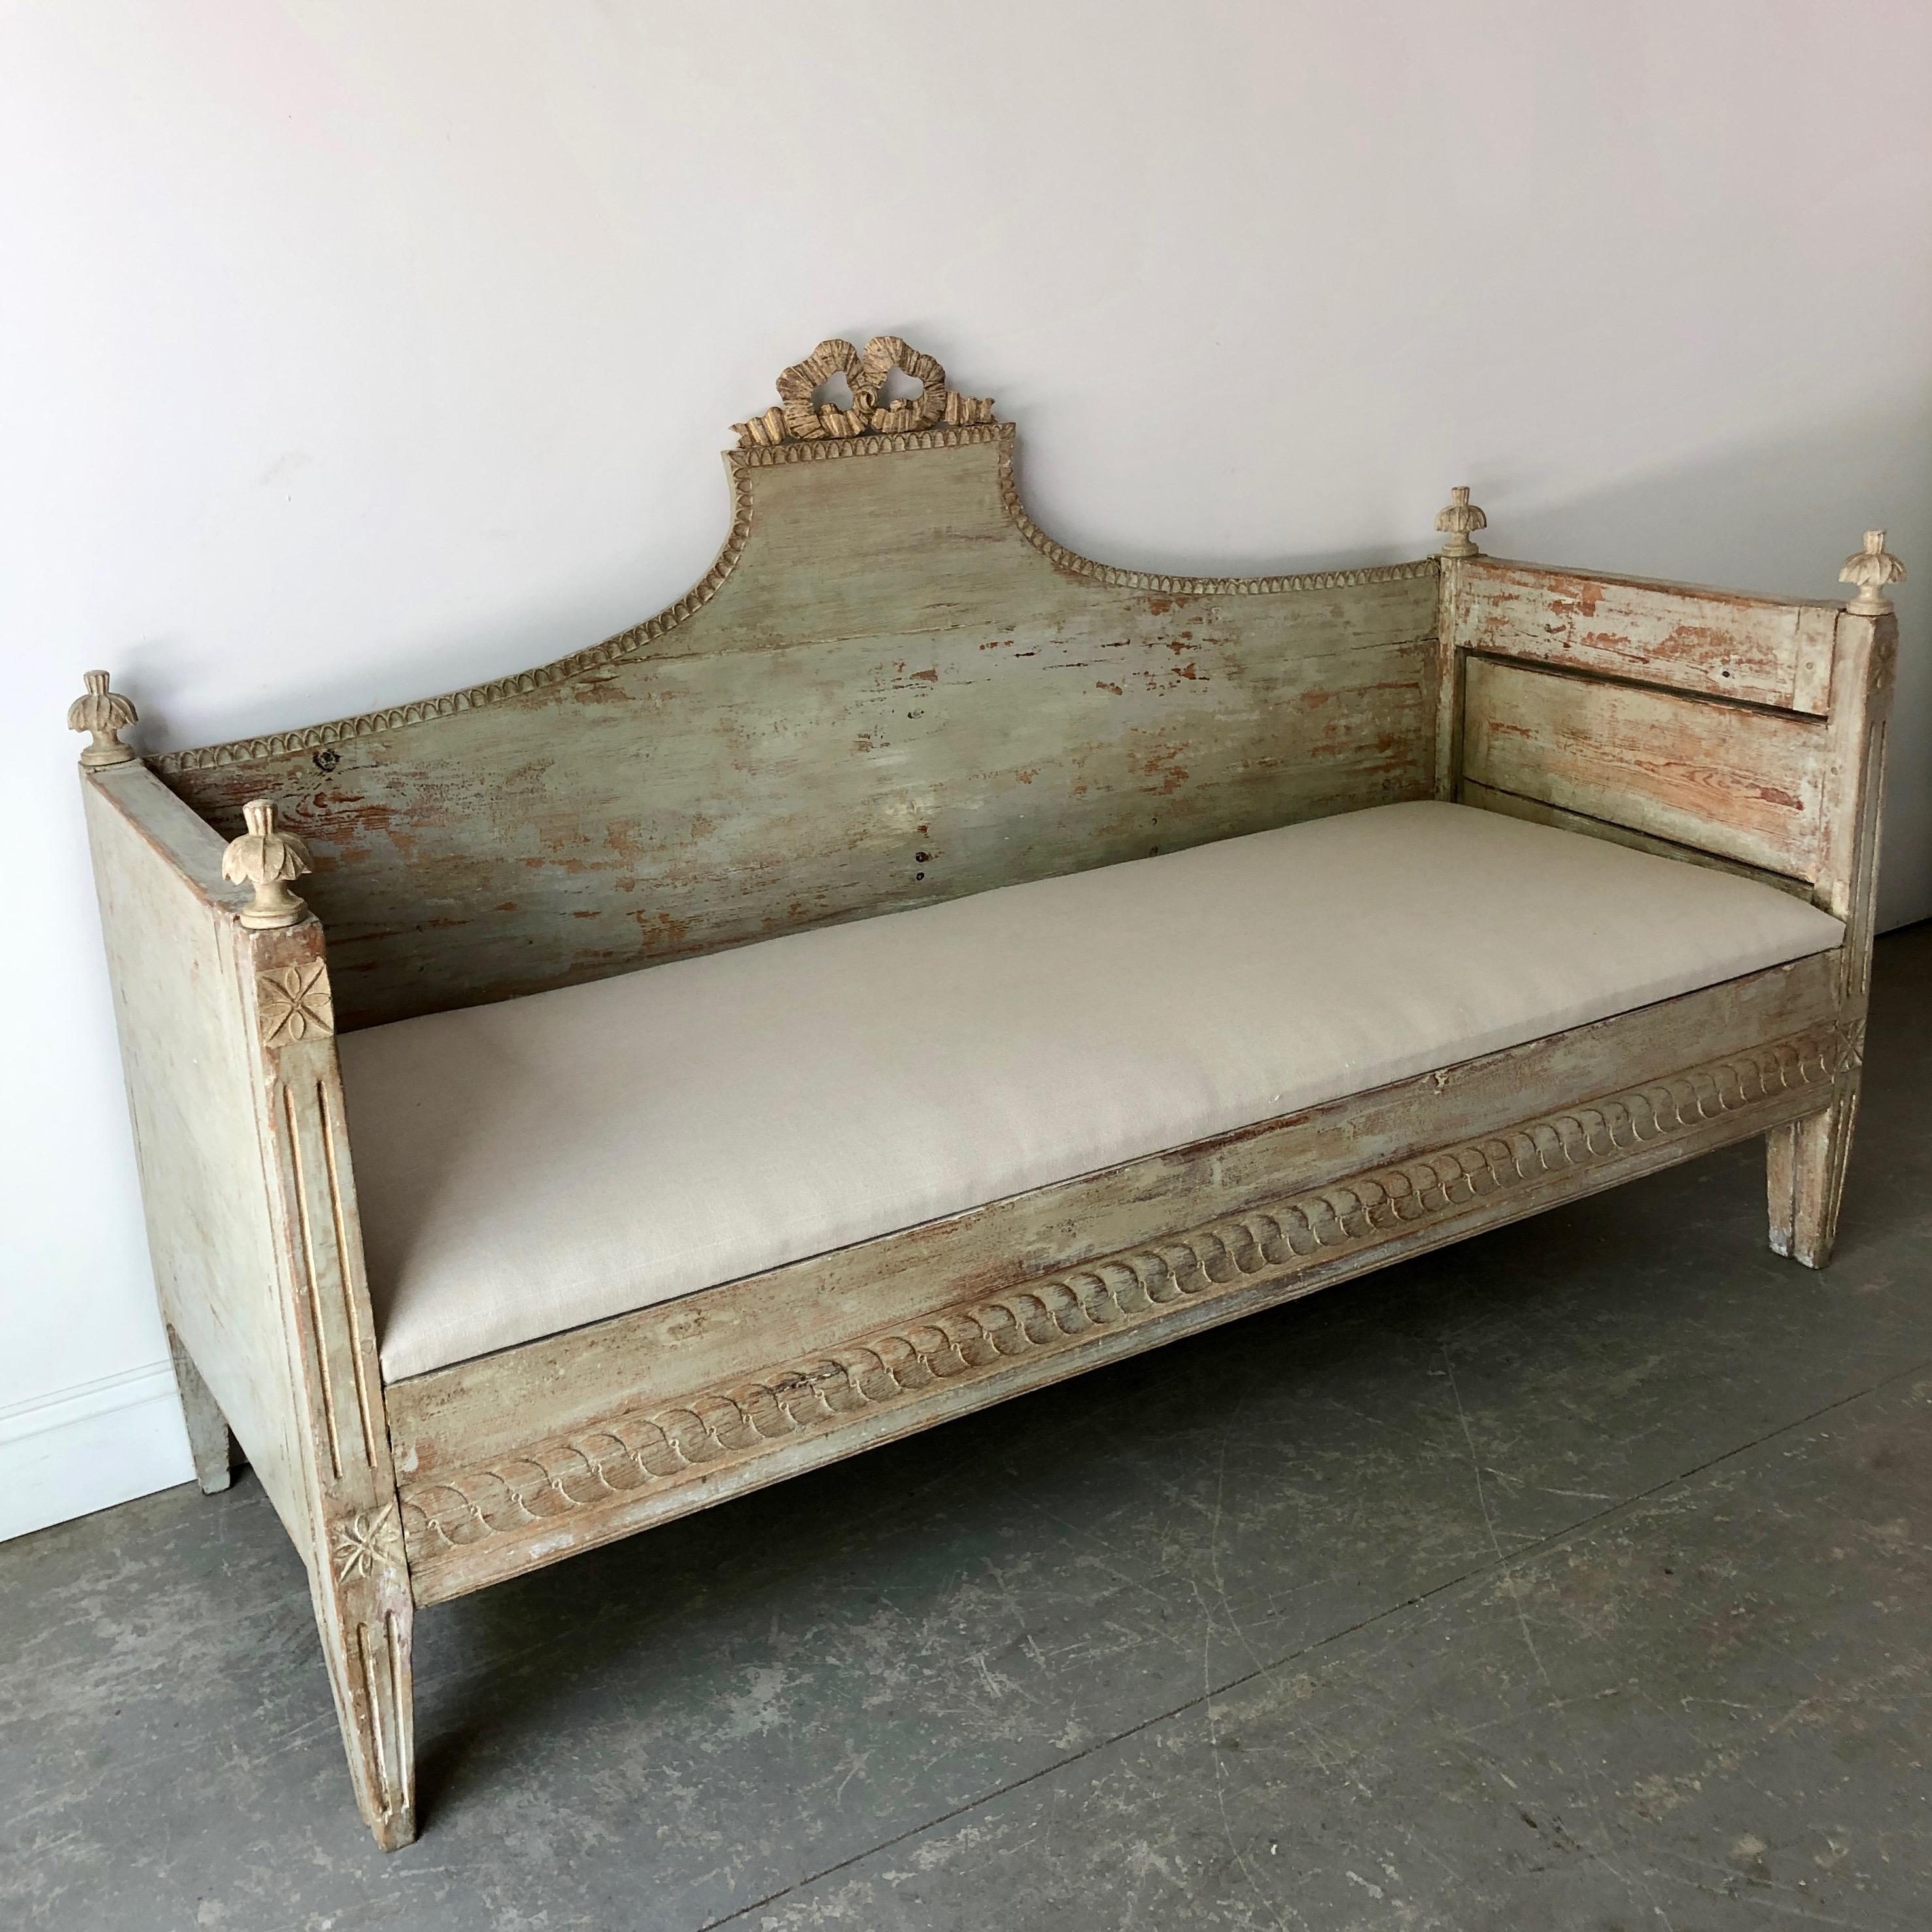 Gustavian sofa bed, Sweden circa 1850 with beautiful Gustavian details; the back and apron with richly carved. The finish has been scraped to reveal much of the original paint. Seat can be lifted off for storage and also the front section pulls out